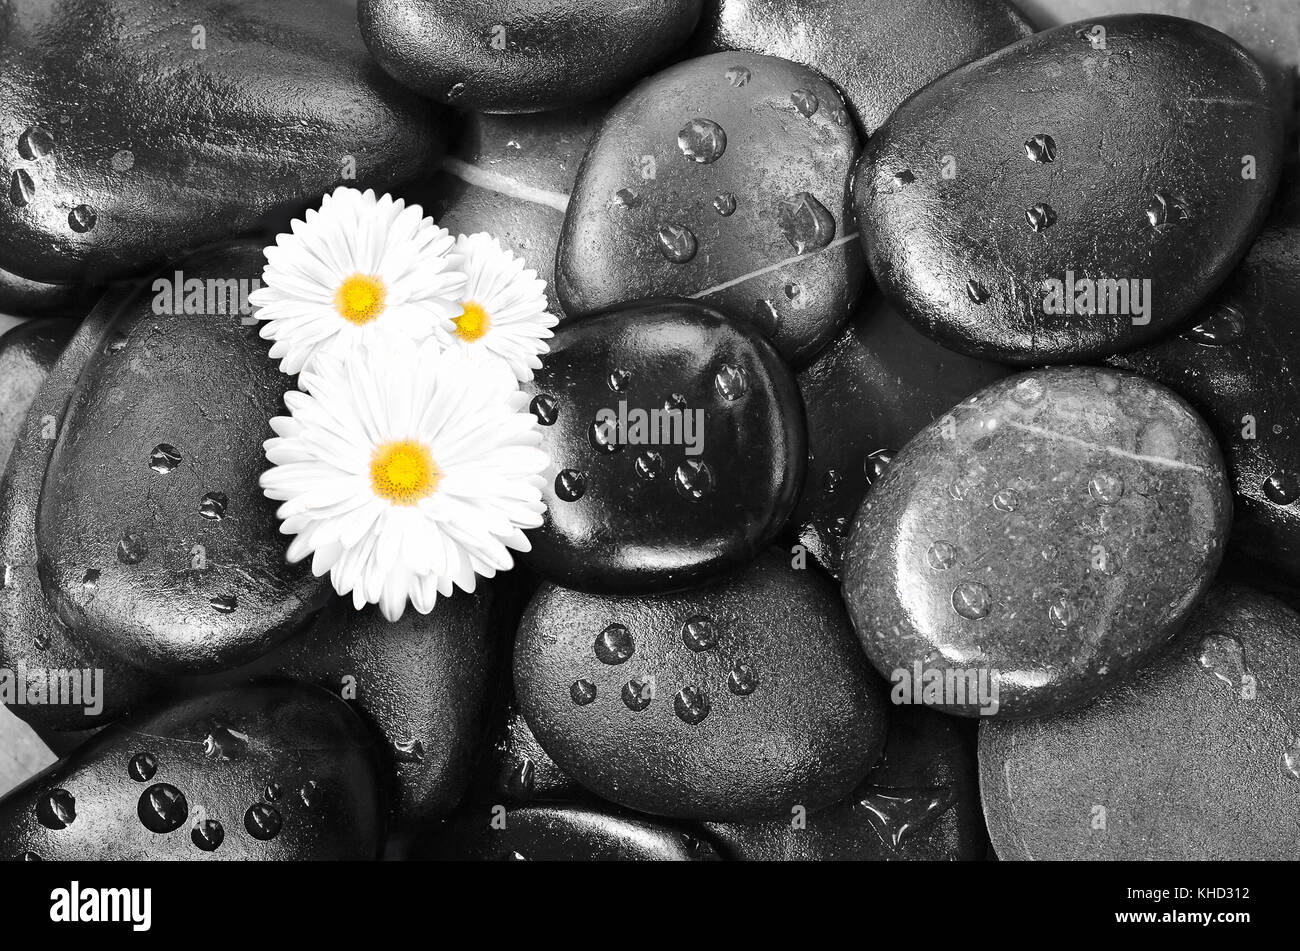 white flower on black pebbles in water drops as background Stock Photo